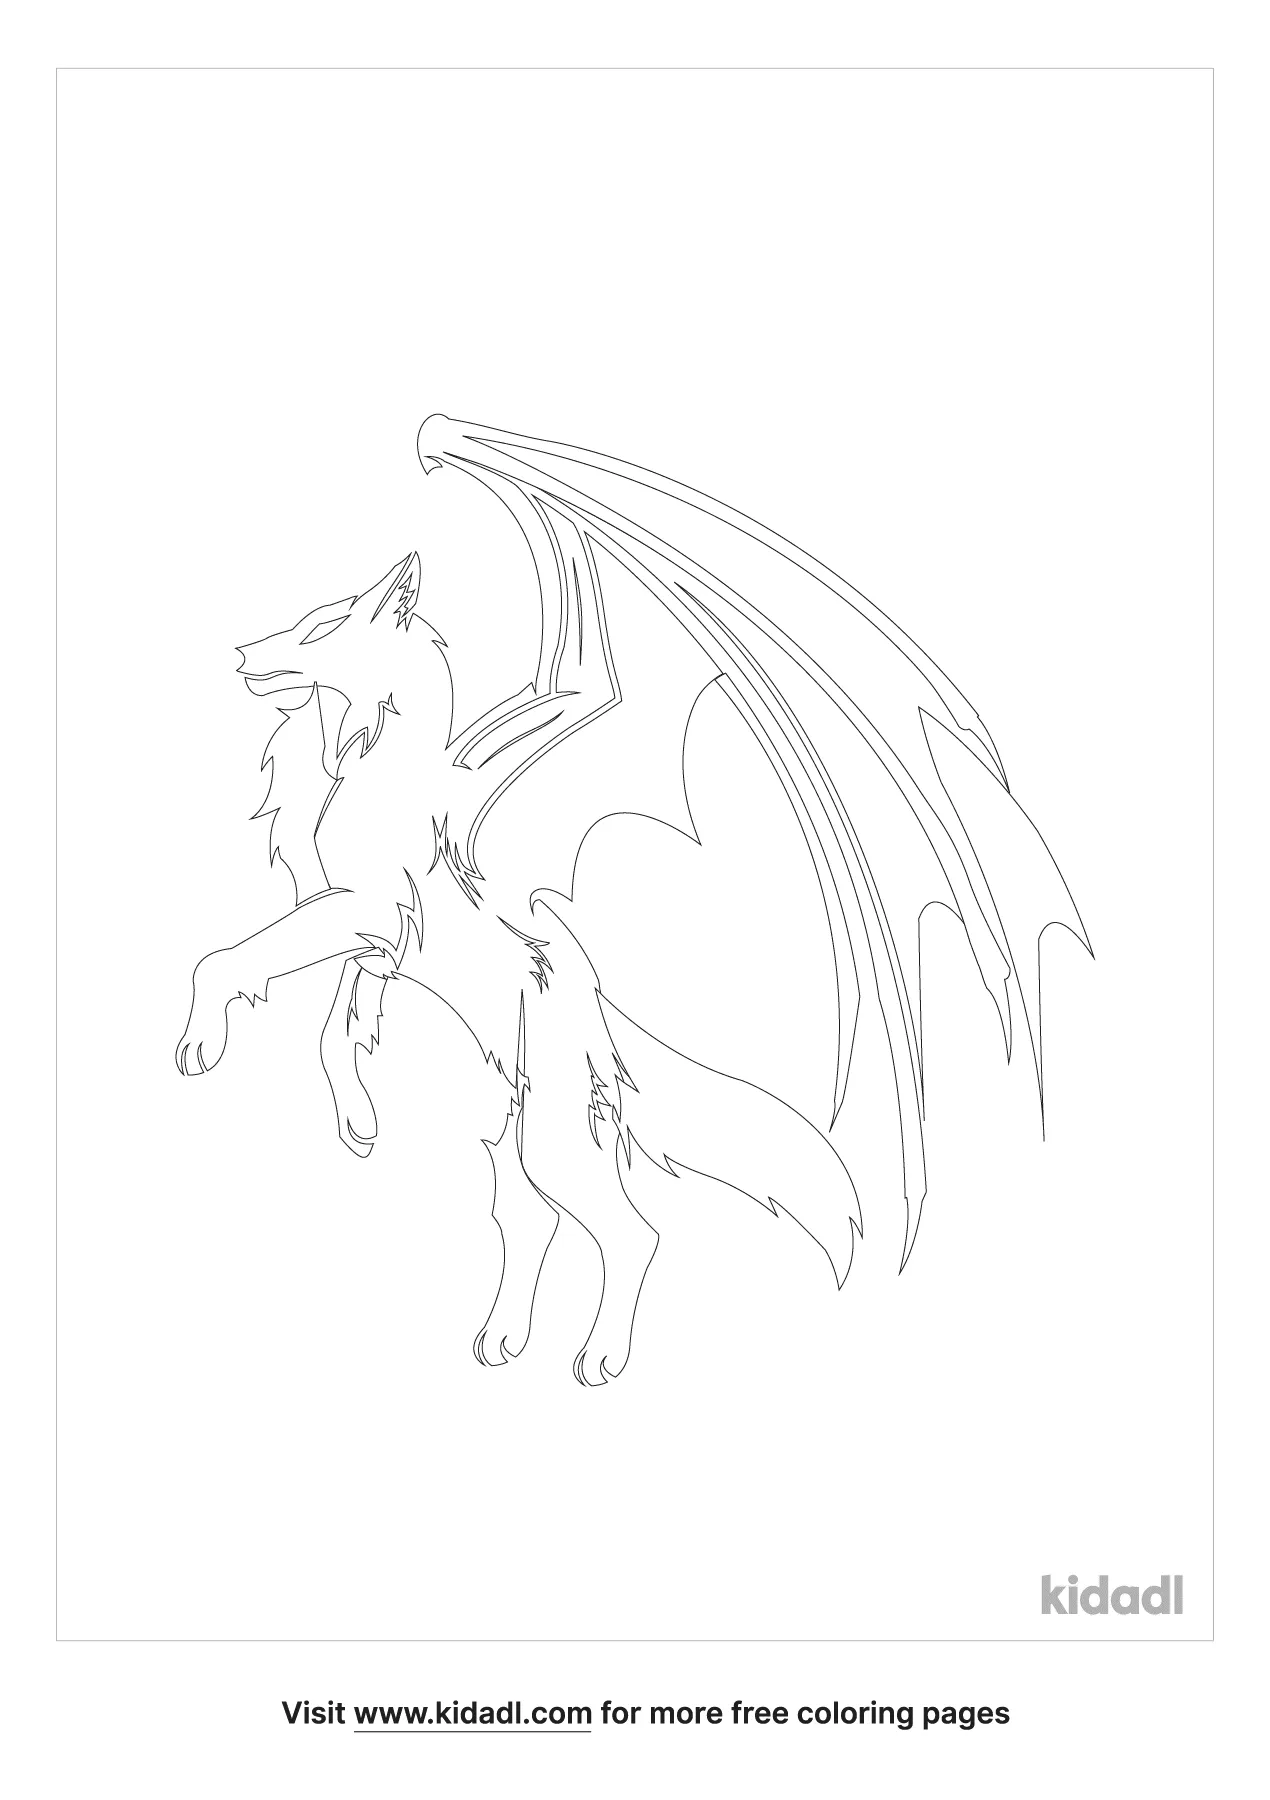 Free she wolf with wings coloring page coloring page printables